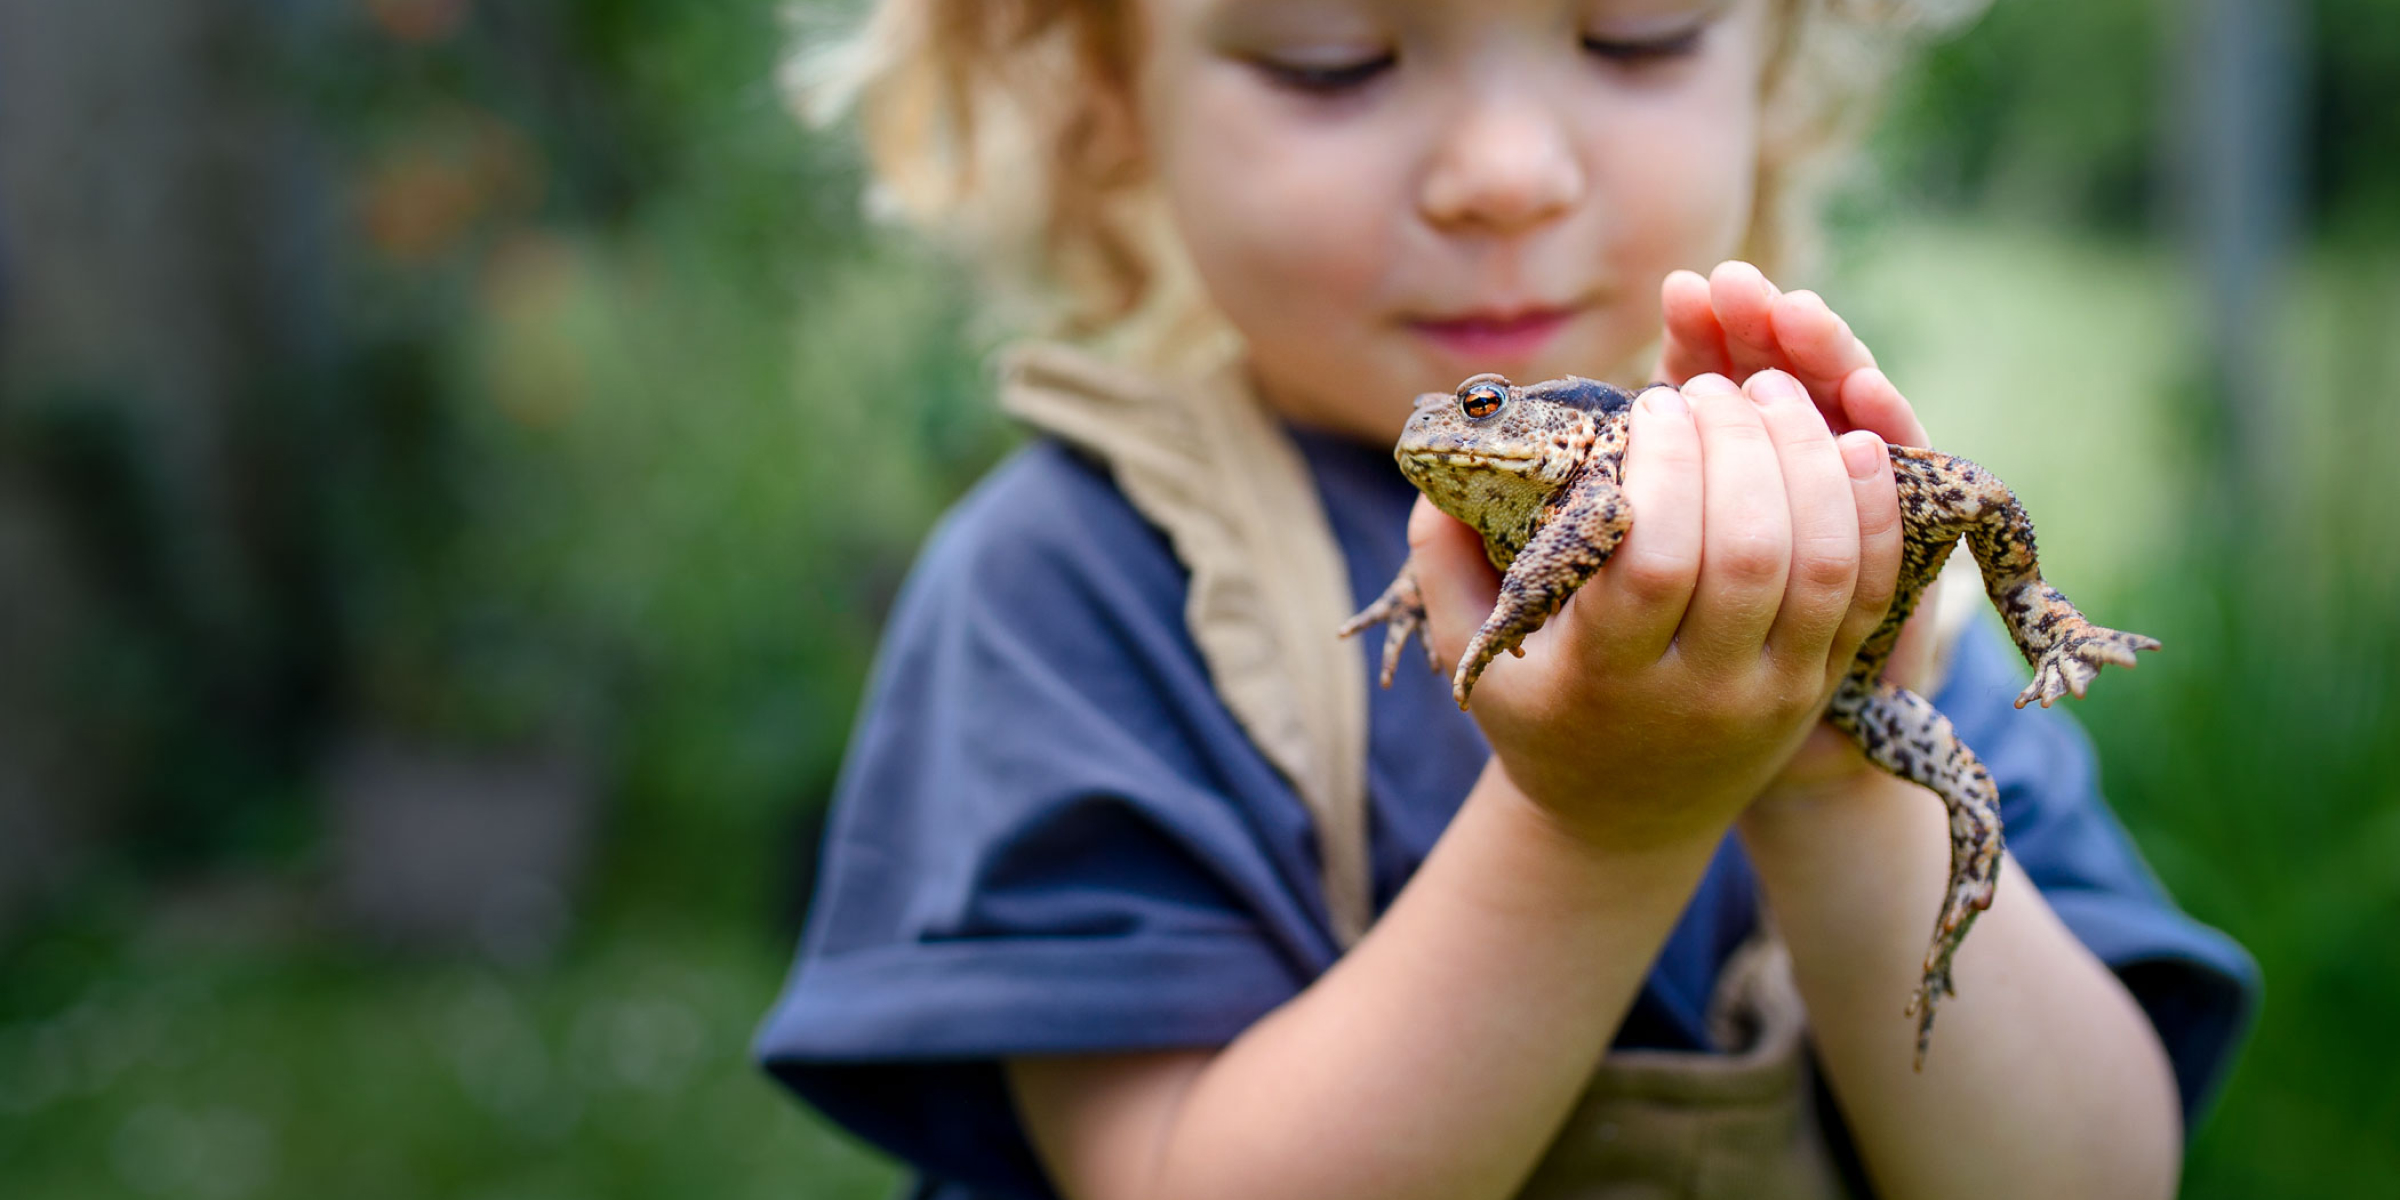 Little girl holding a frog in both her hands.